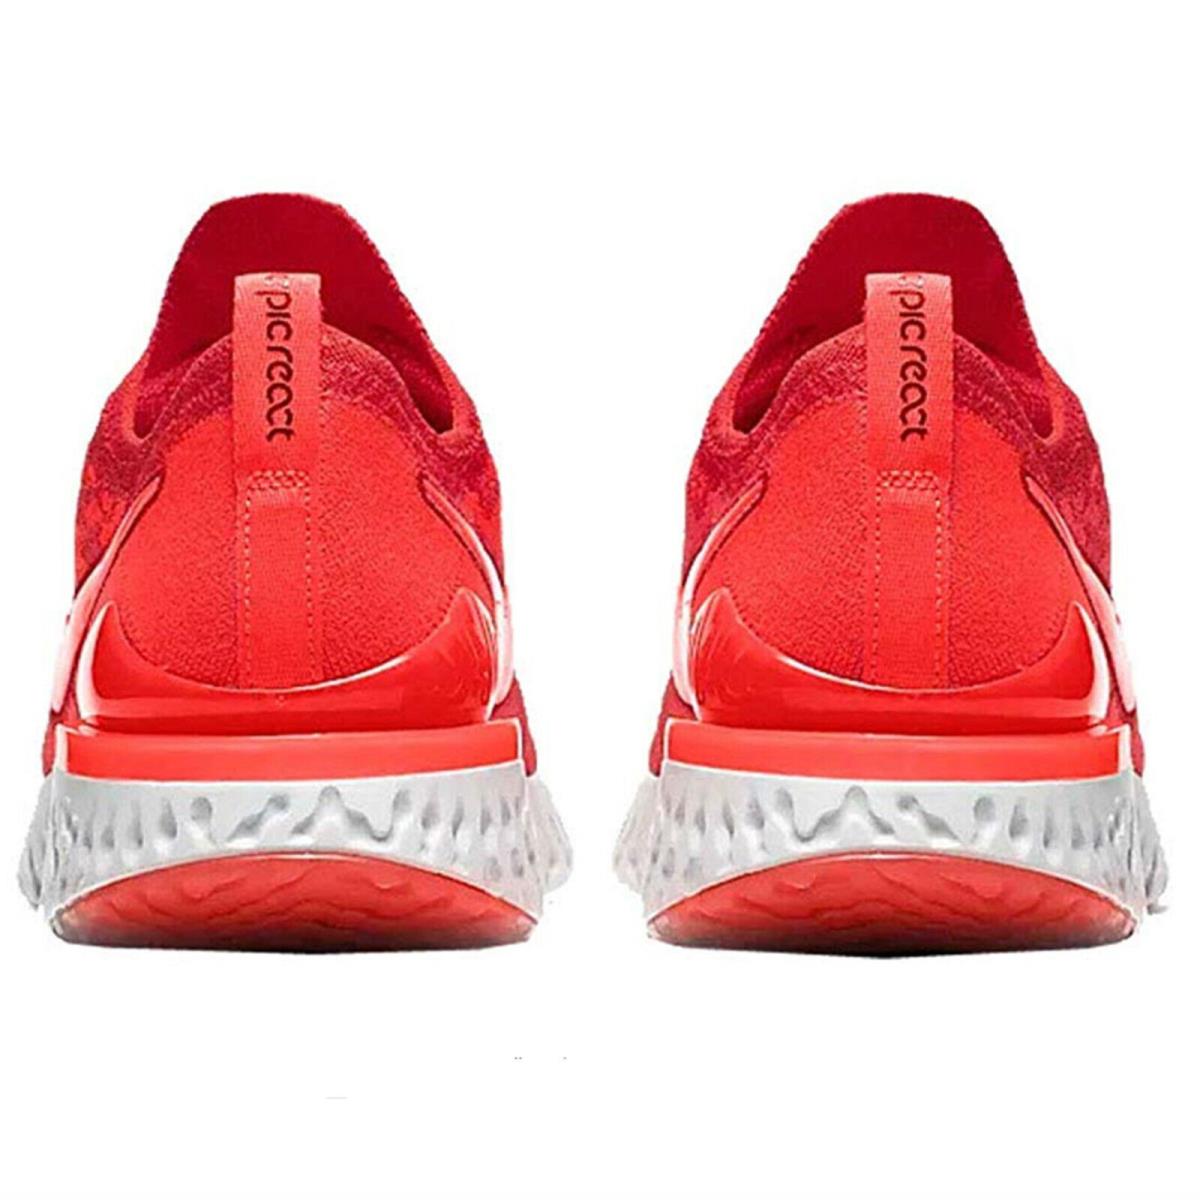 Nike shoes Epic React Flyknit - CHILI RED / BRIGHT CRIMSON , CHILI RED / BRIGHT CRIMSON Manufacturer 3